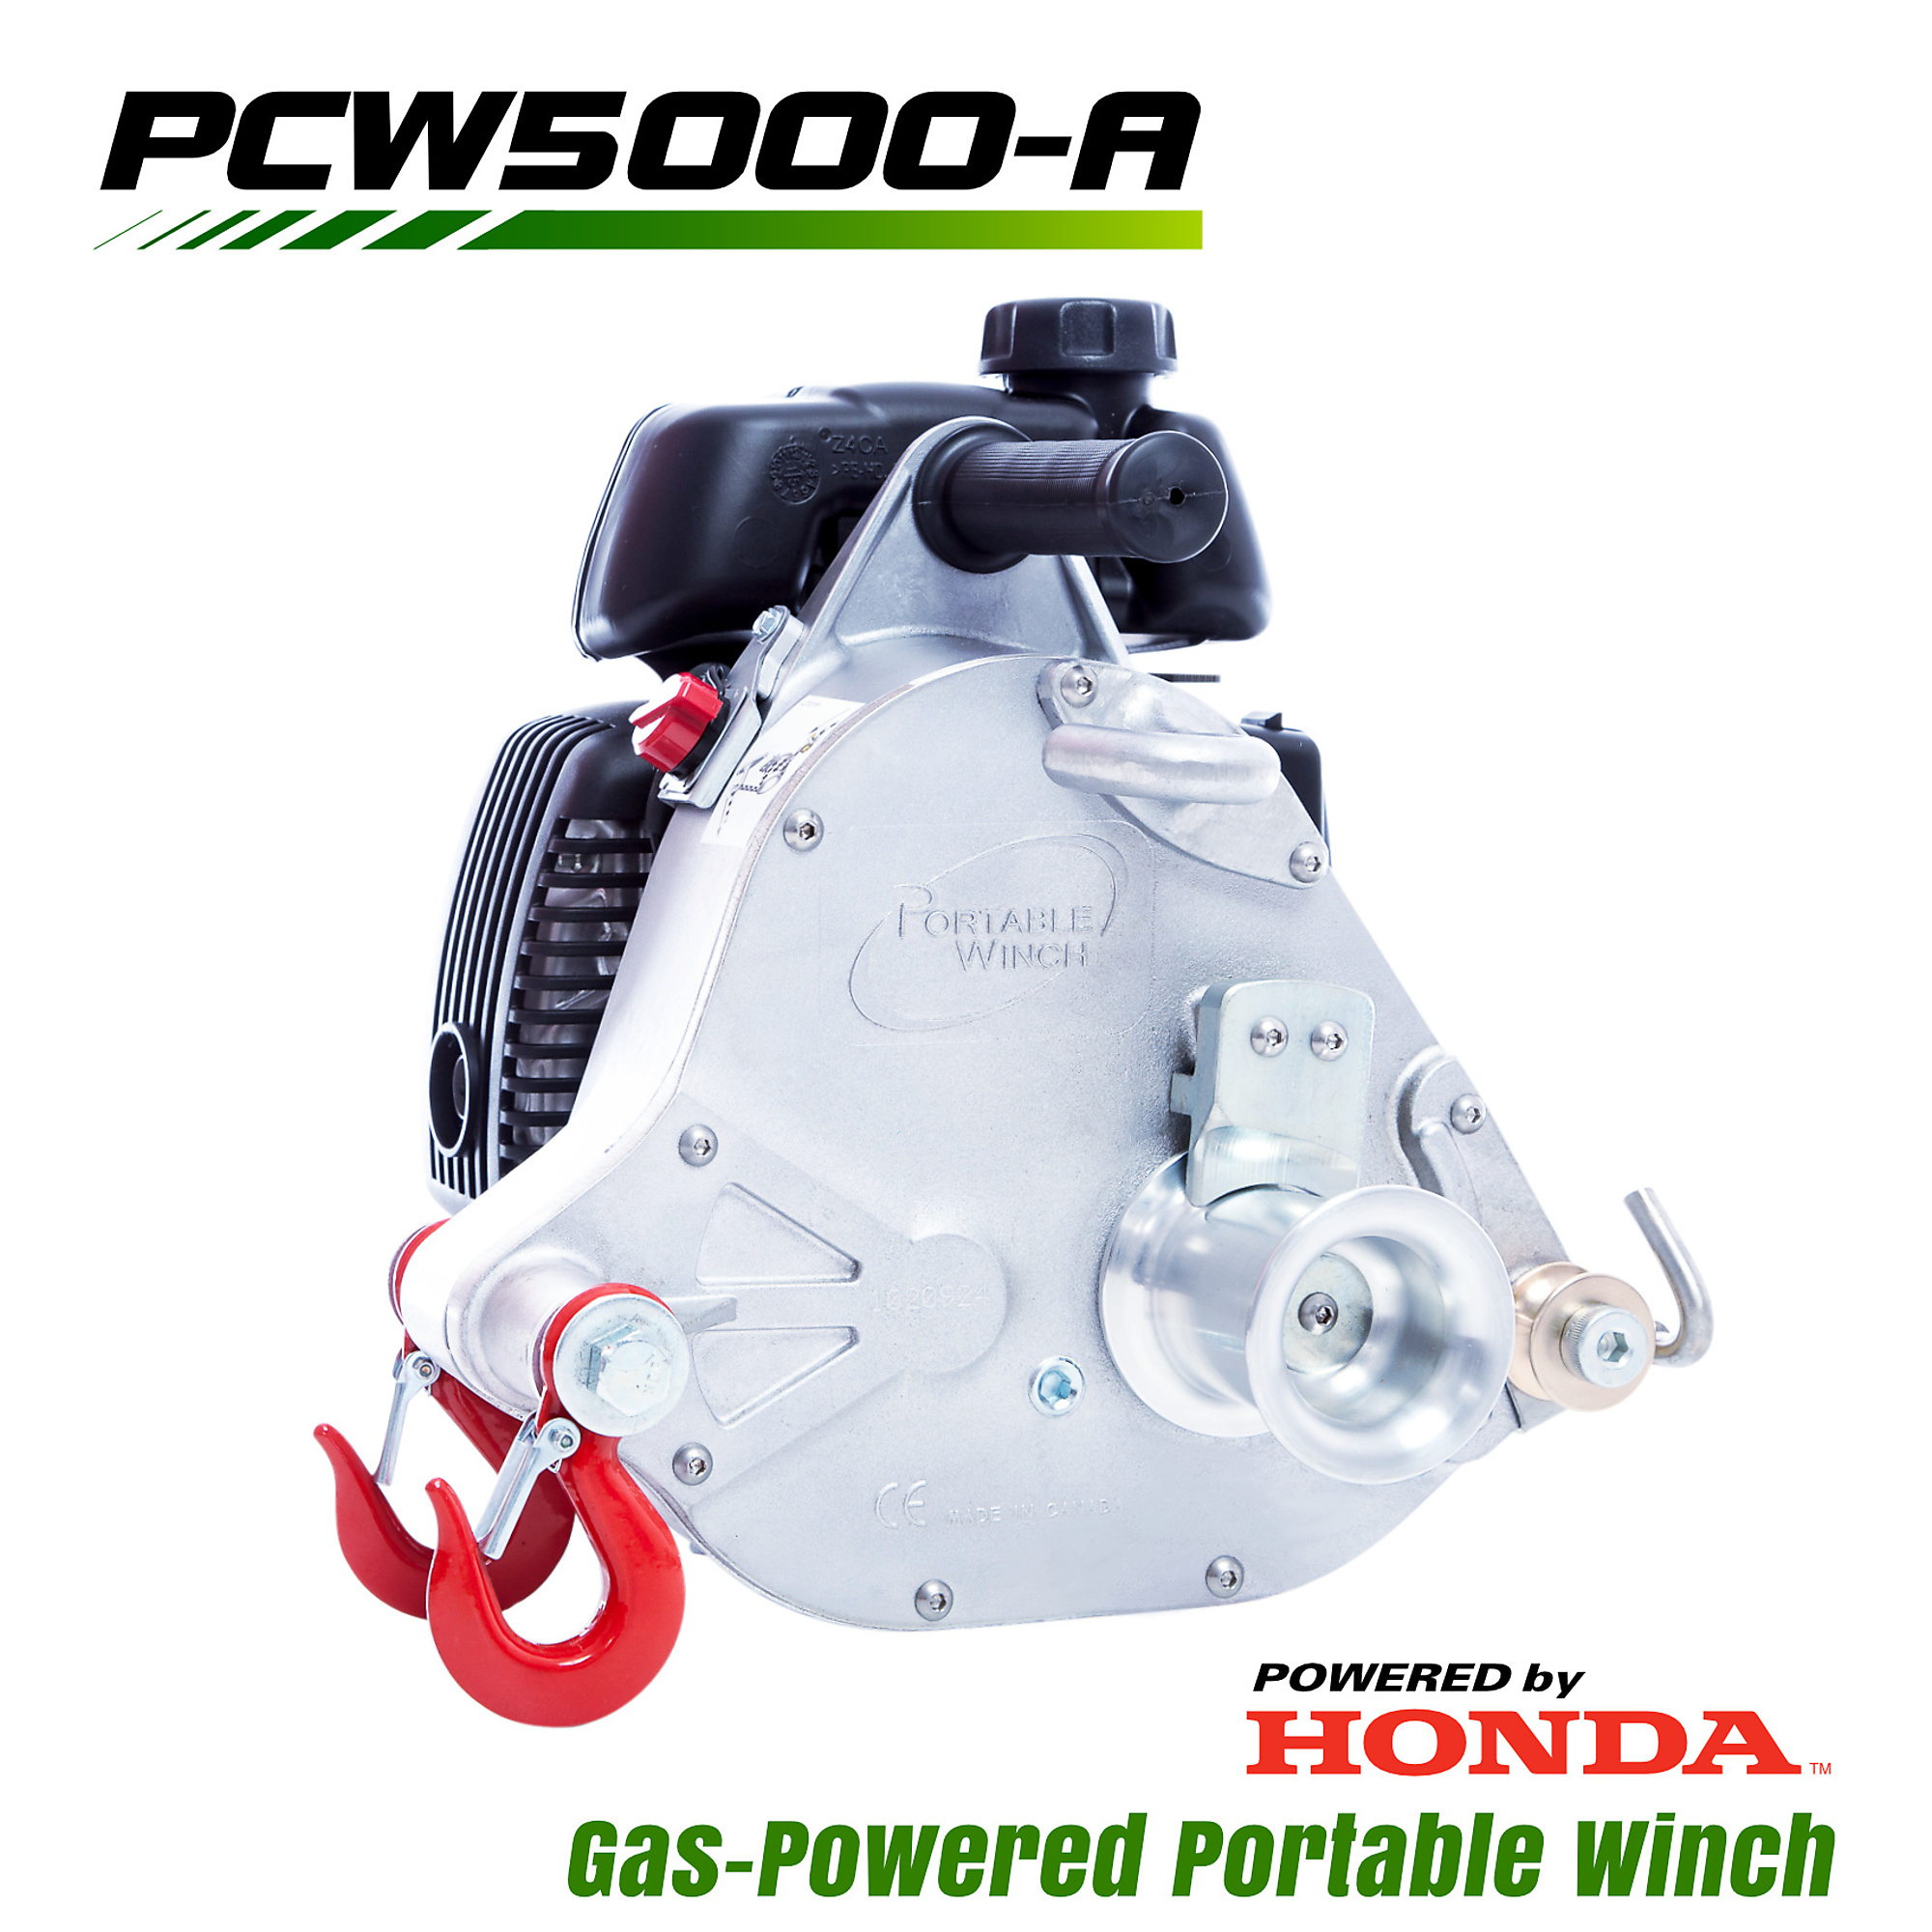 Portable Winch, Gas Pulling Winch Accessories - Honda GXH50 Capacity (Line Pull) 2200 lb, Model PCW5000-A